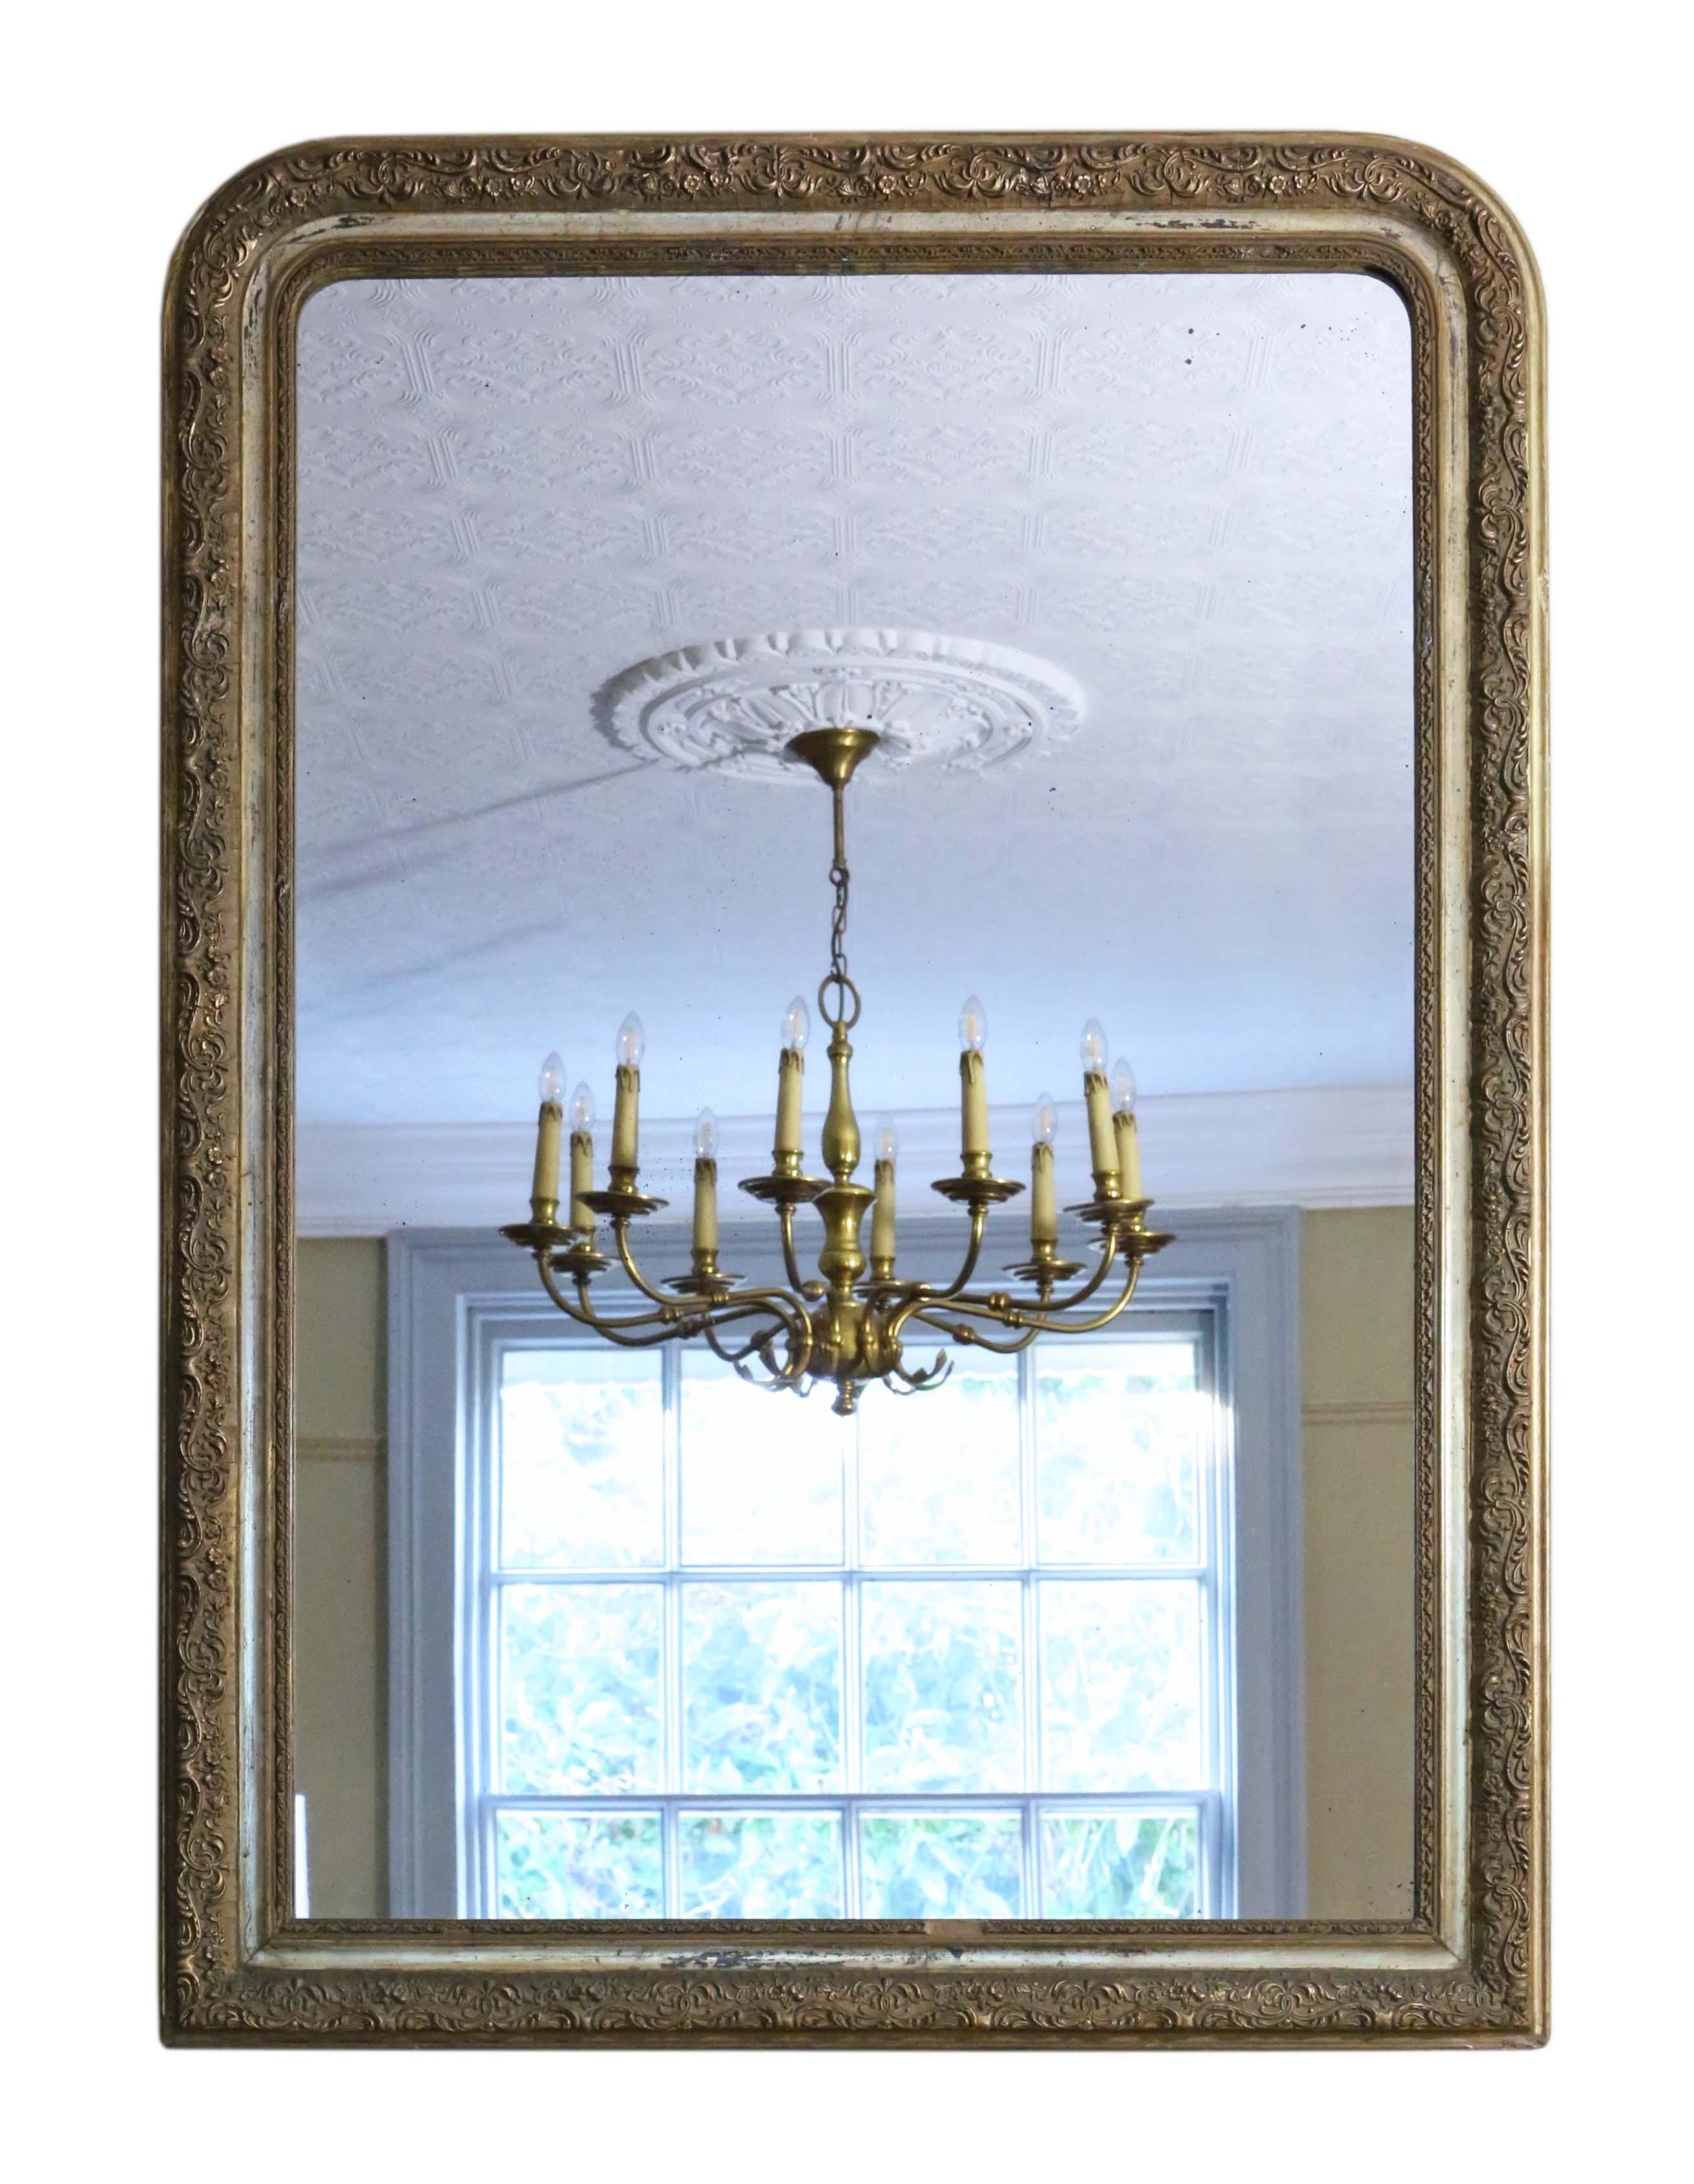 Antique large fine quality gilt wall mirror or overmantle 19th century.

An impressive rare find, that would look amazing in the right location. No loose joints or woodworm.

The original mirrored glass is in good condition with light oxidation